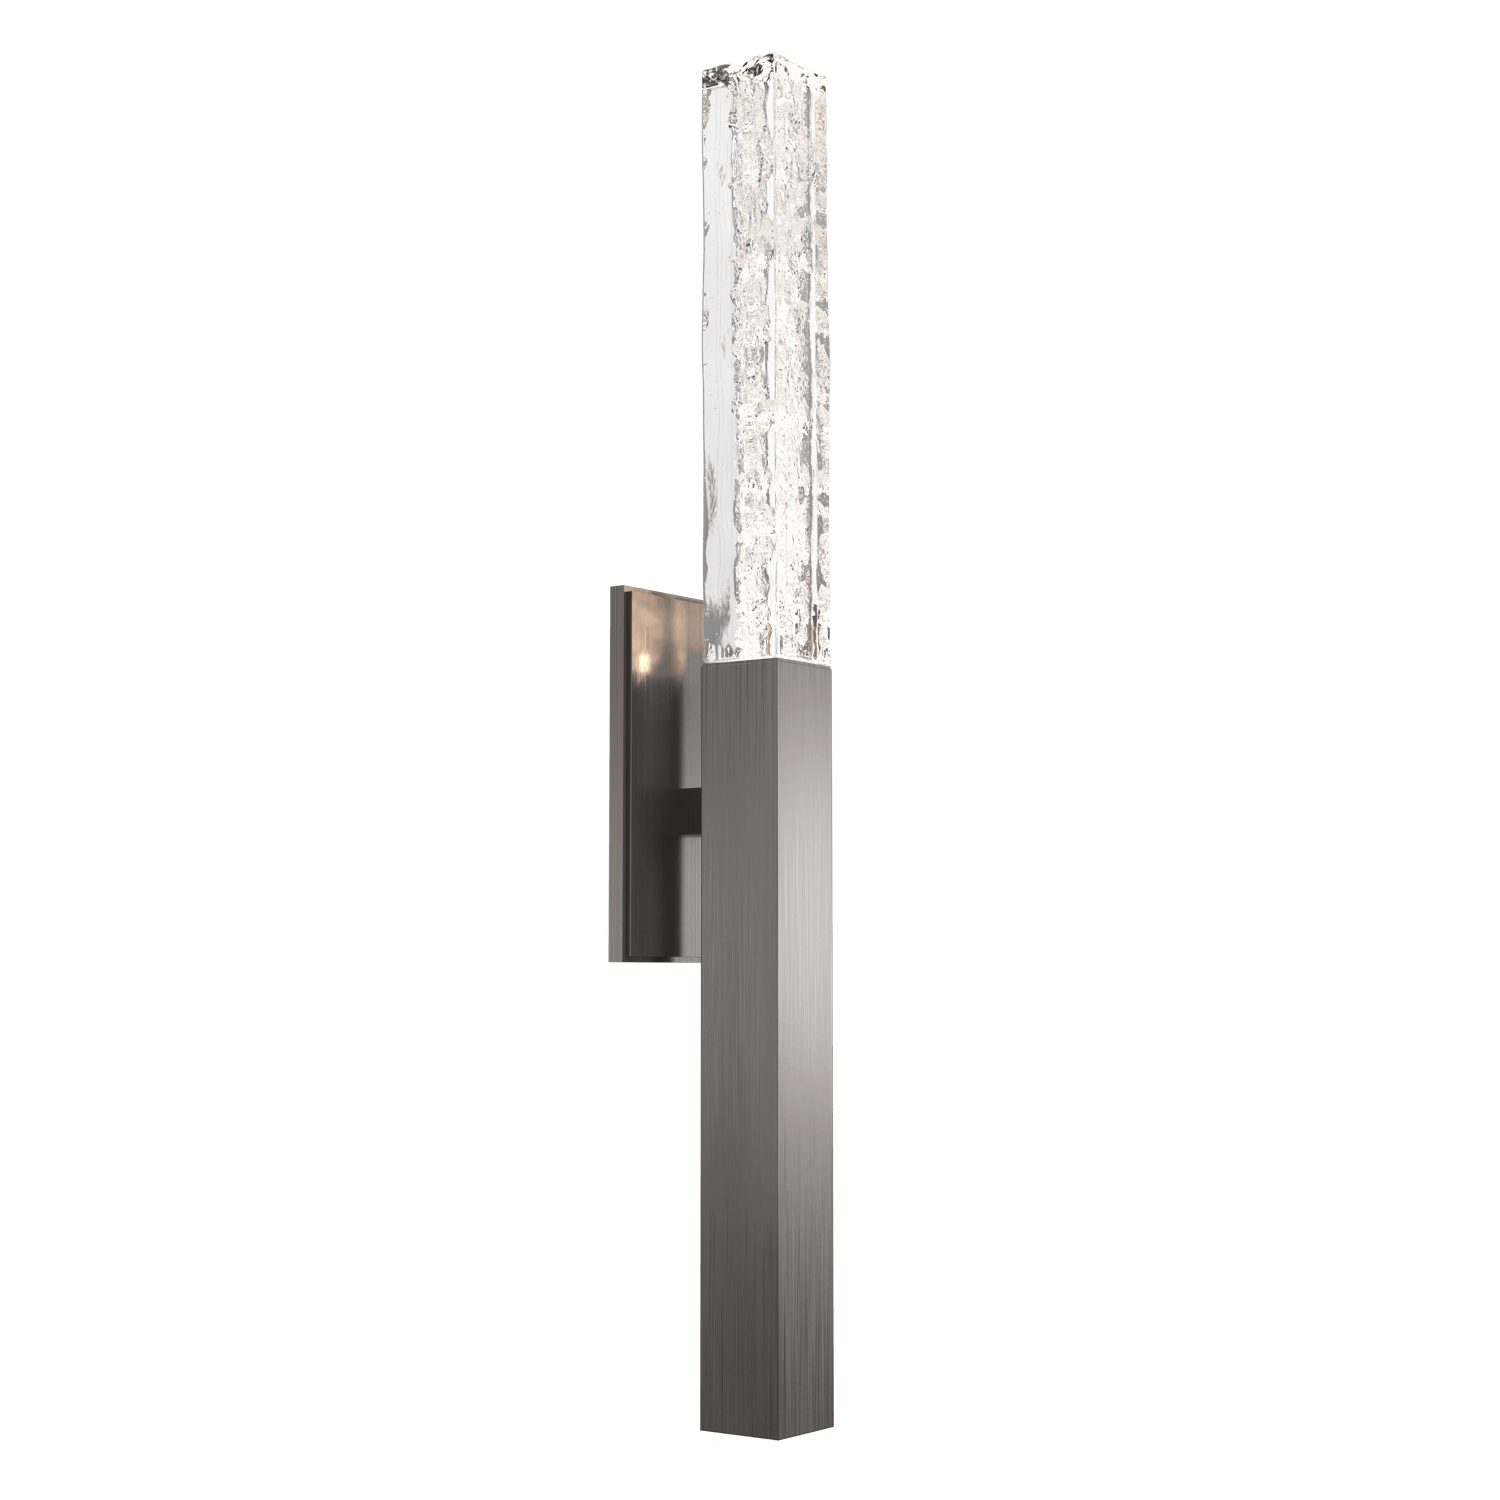 IDB0060-26-GM-GC-Hammerton-Studio-Axis-Indoor-Sconce-with-Gunmetal-finish-and-clear-cast-glass-and-LED-lamping